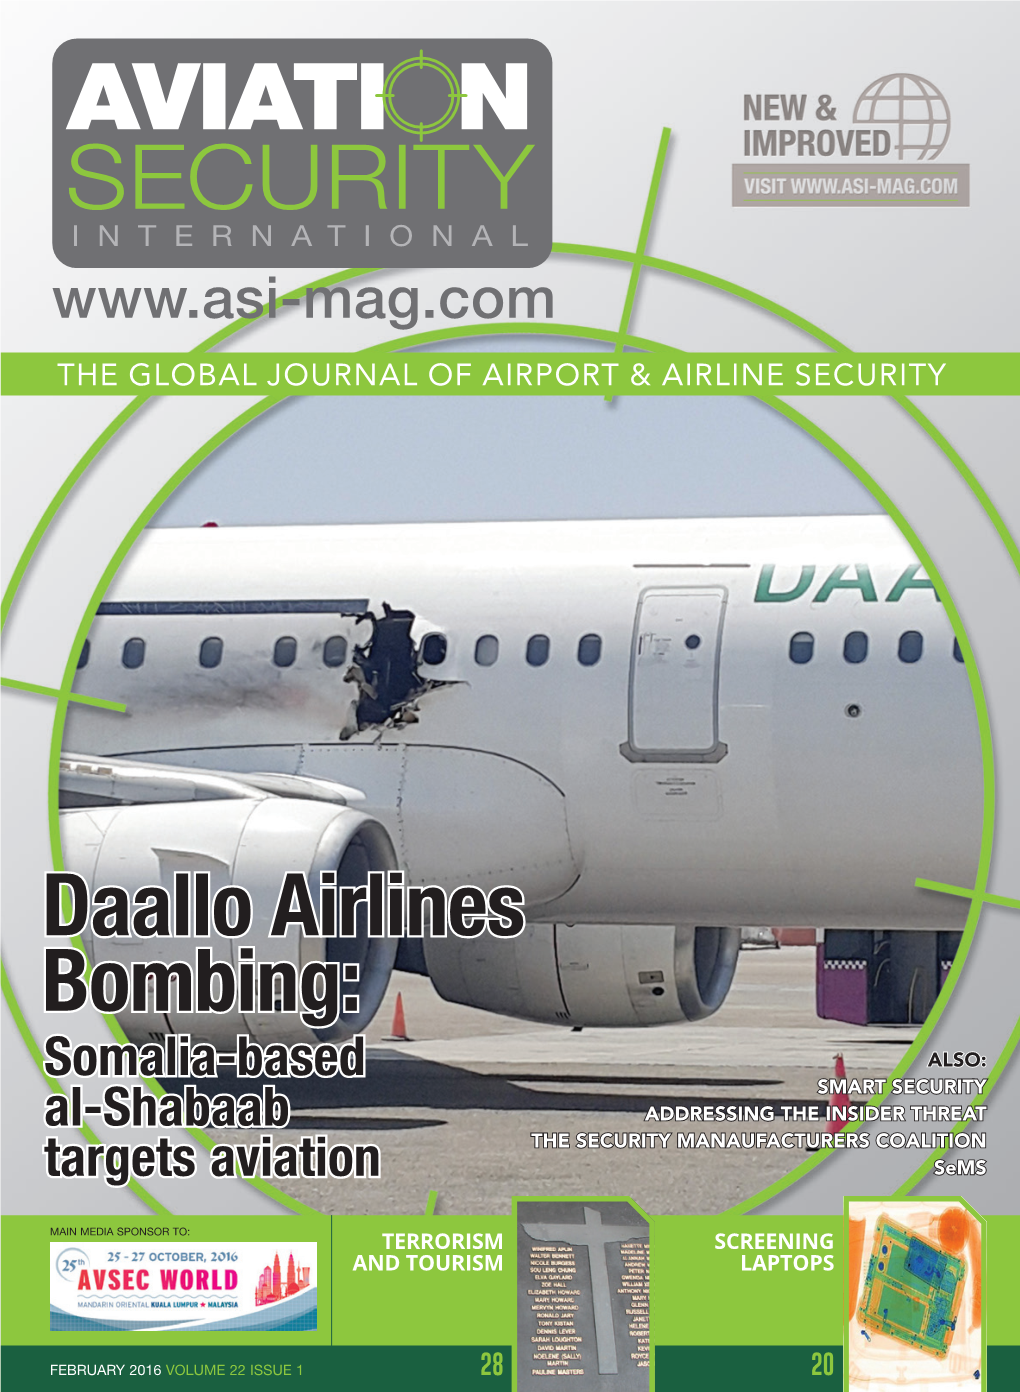 Daallo Airlines Bombing: ALSO: Somalia-Based SMART SECURITY Al-Shabaab ADDRESSING the INSIDER THREAT the SECURITY MANAUFACTURERS COALITION Targets Aviation Sems